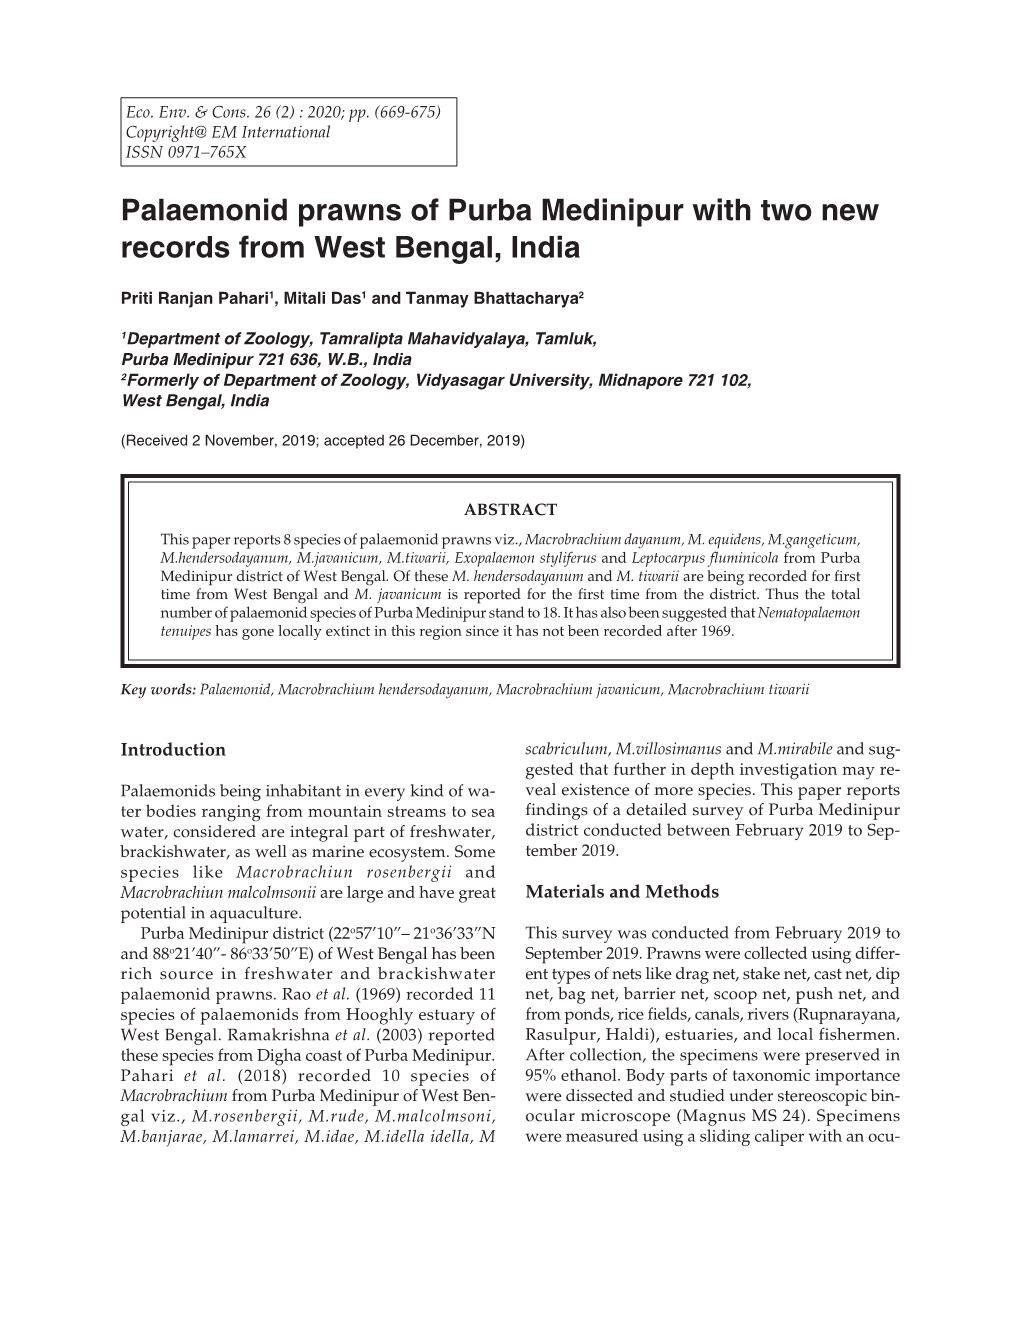 Palaemonid Prawns of Purba Medinipur with Two New Records from West Bengal, India